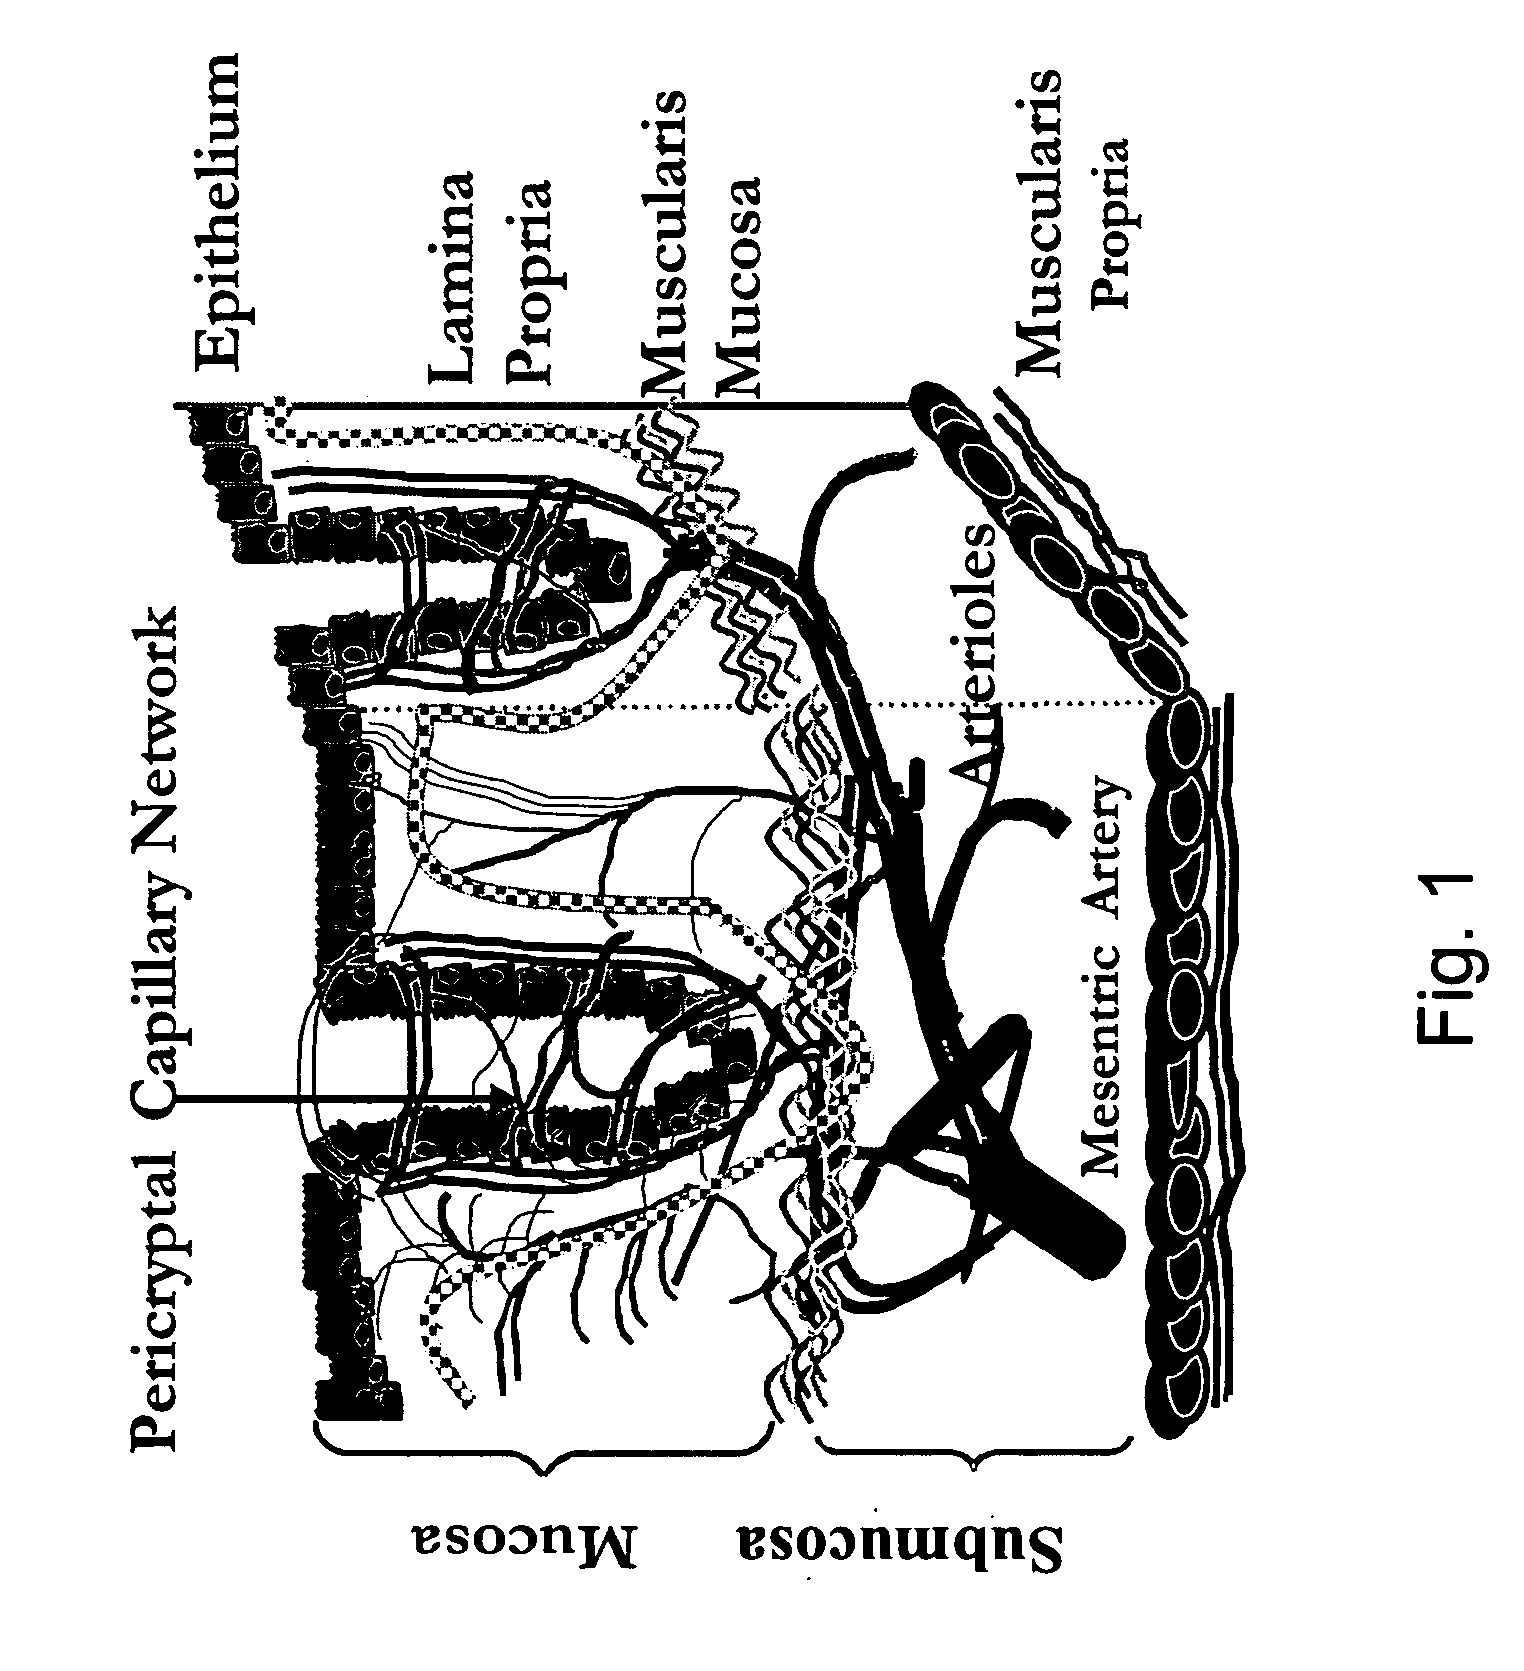 Method of recognizing abnormal tissue using the detection of early increase in microvascular blood content